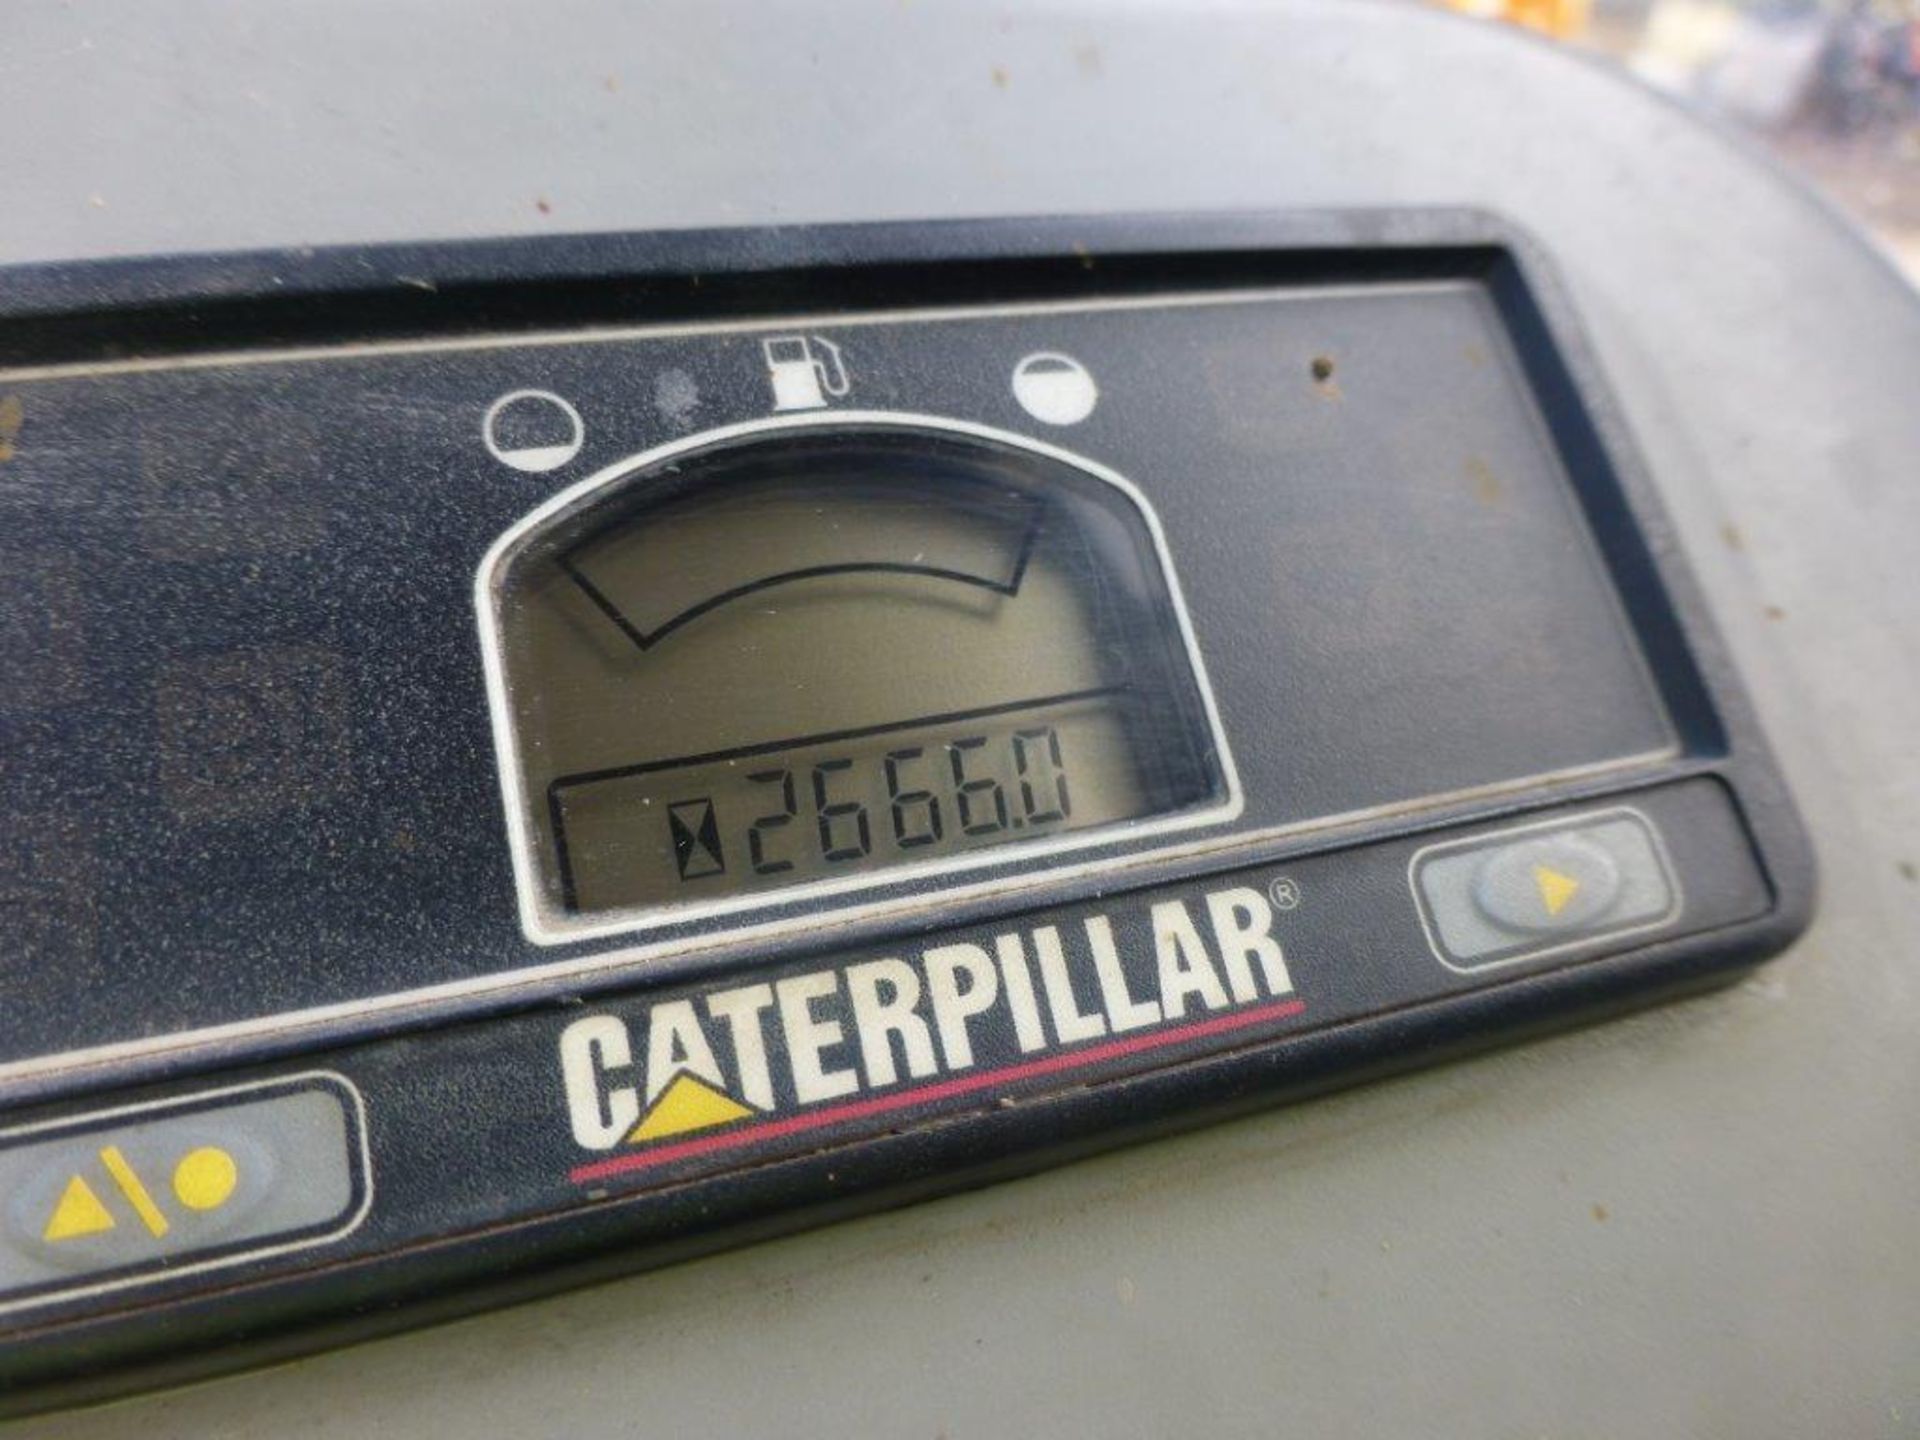 Caterpillar 302.5C rubber tracked mini excavator (2010), indicated hours 2666.0, PIN no. - Image 5 of 6